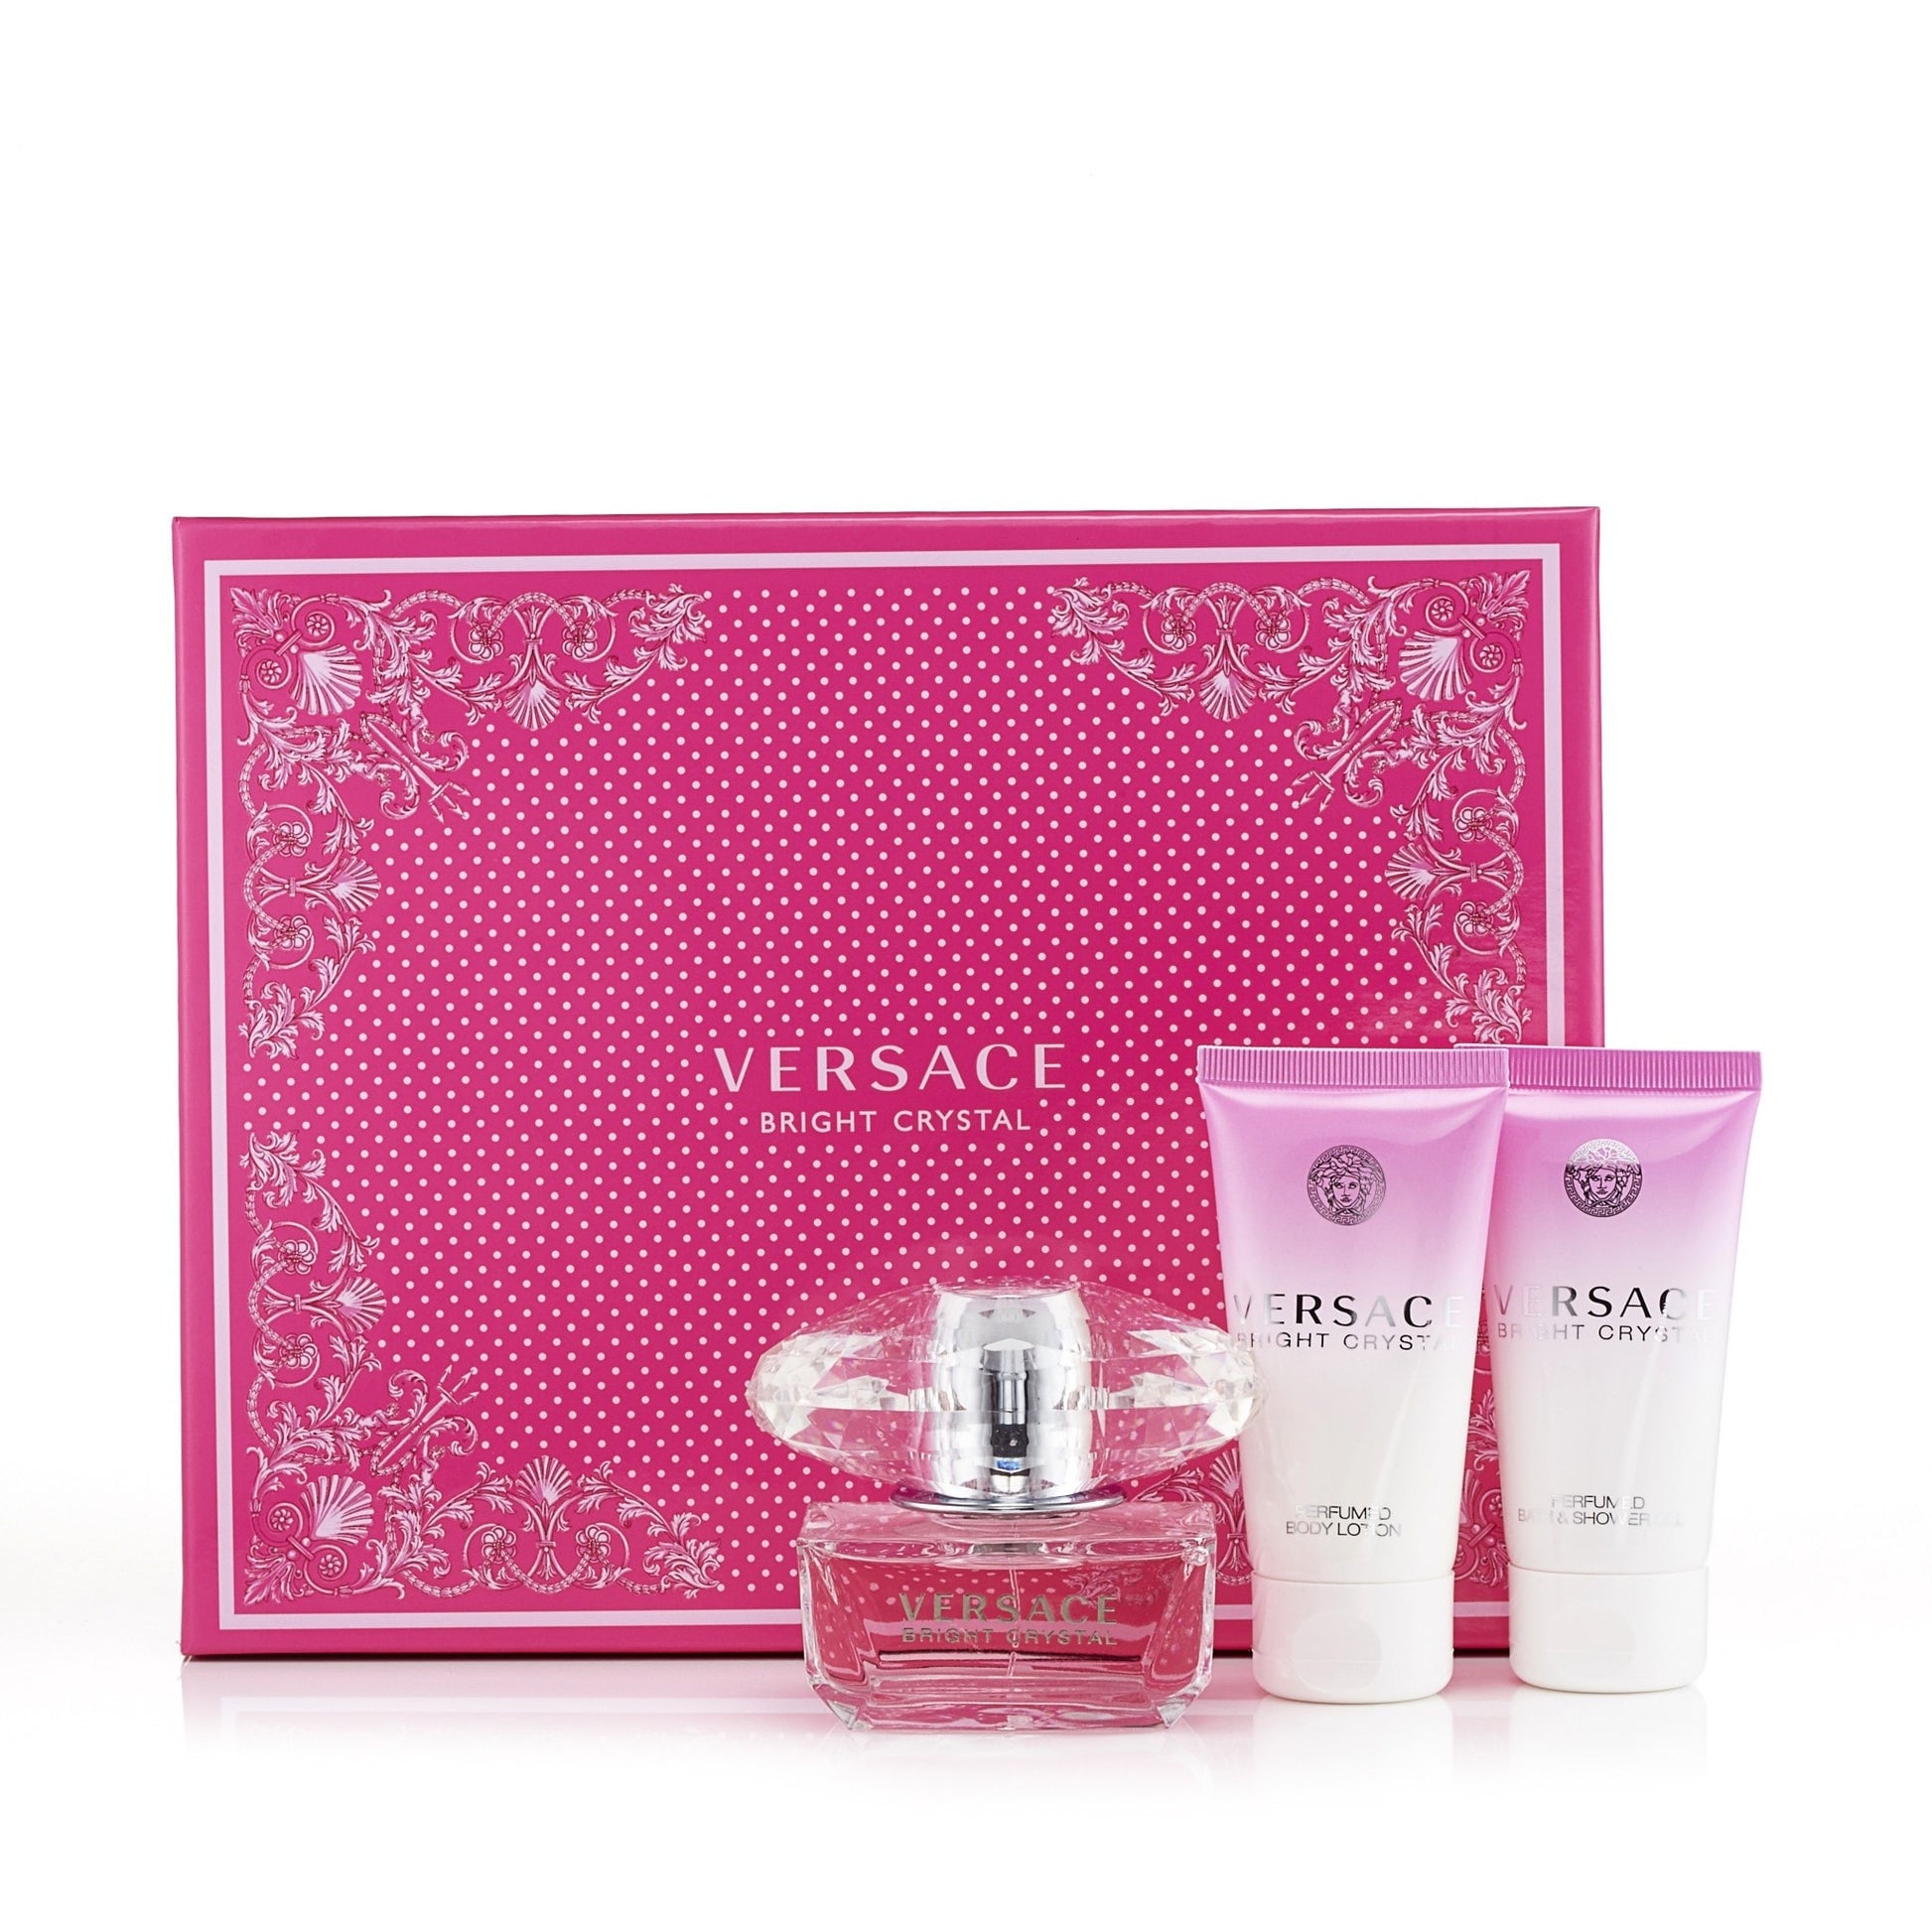 Versace Bright Crystal Gift Set Womens 1.7 oz.  Click to open in modal